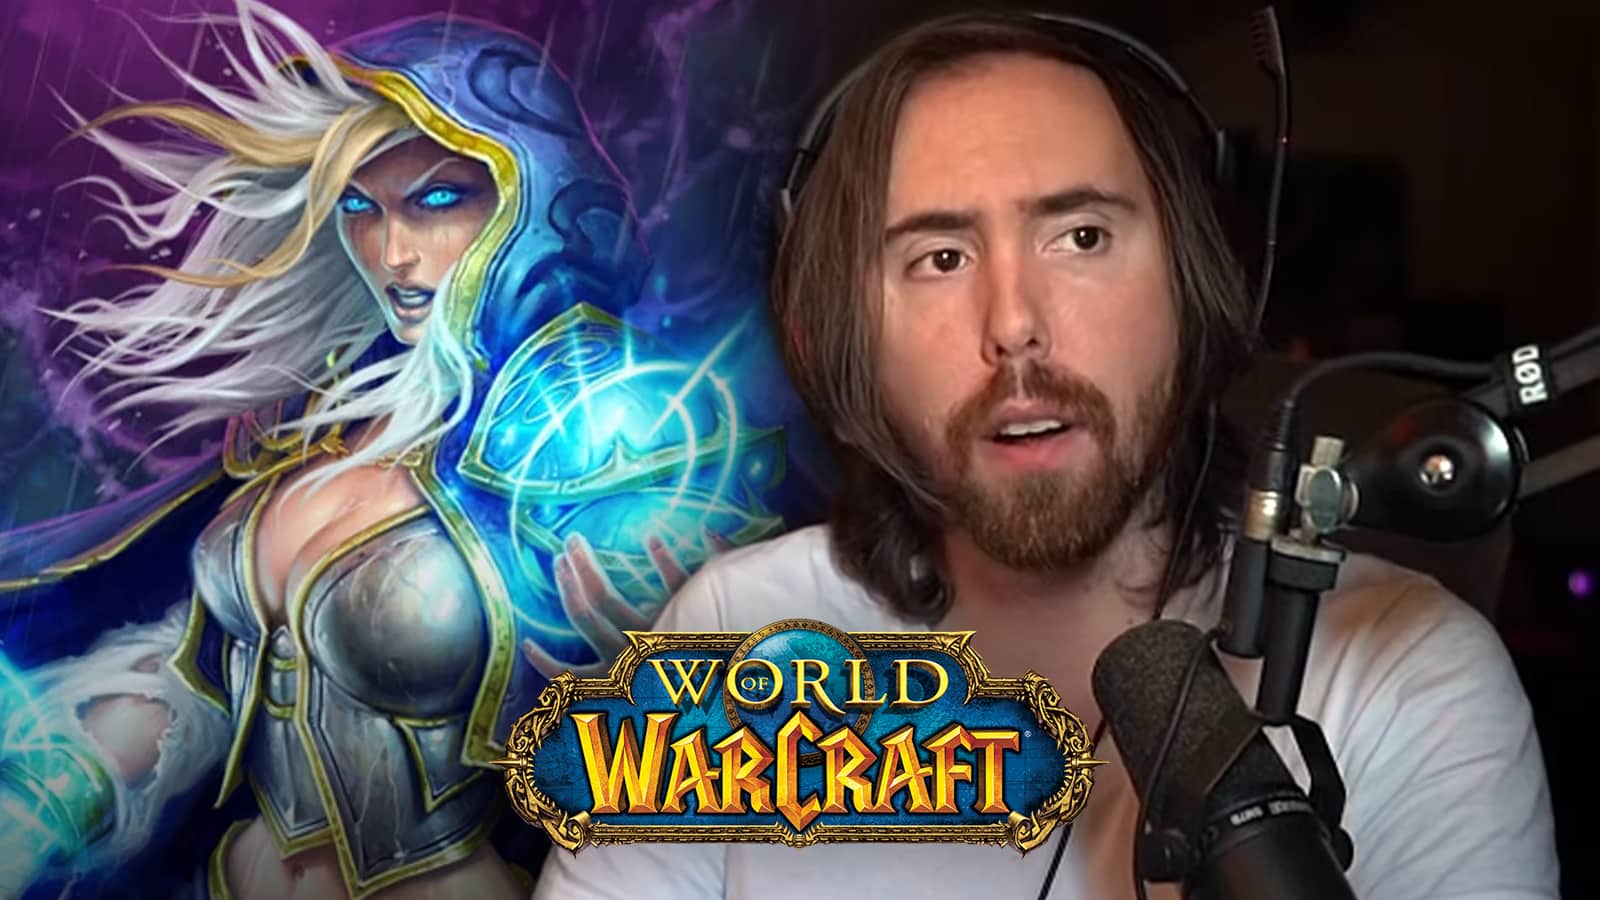 Asmongold slams WoW developers Blizzard while sitting next to Jaina Proudmoore.